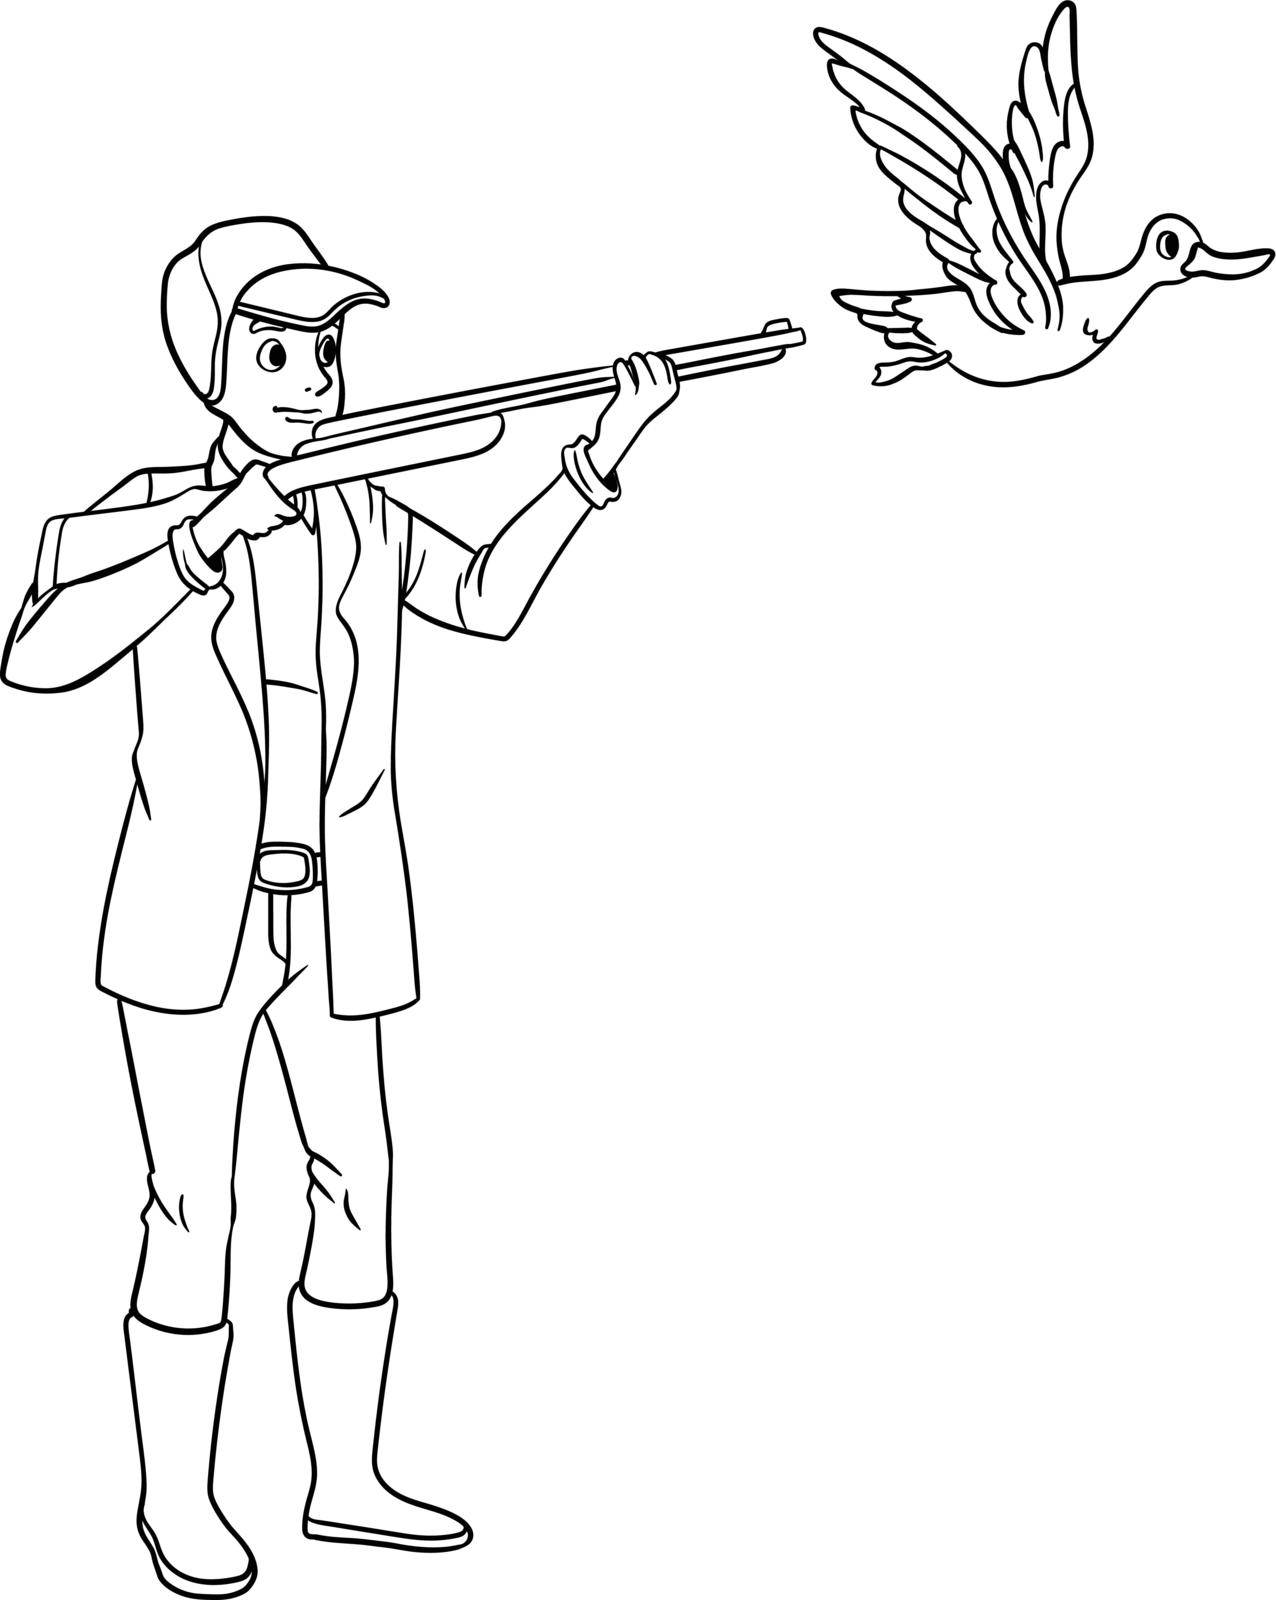 Duck Hunting Isolated Coloring Page for Kids by abbydesign